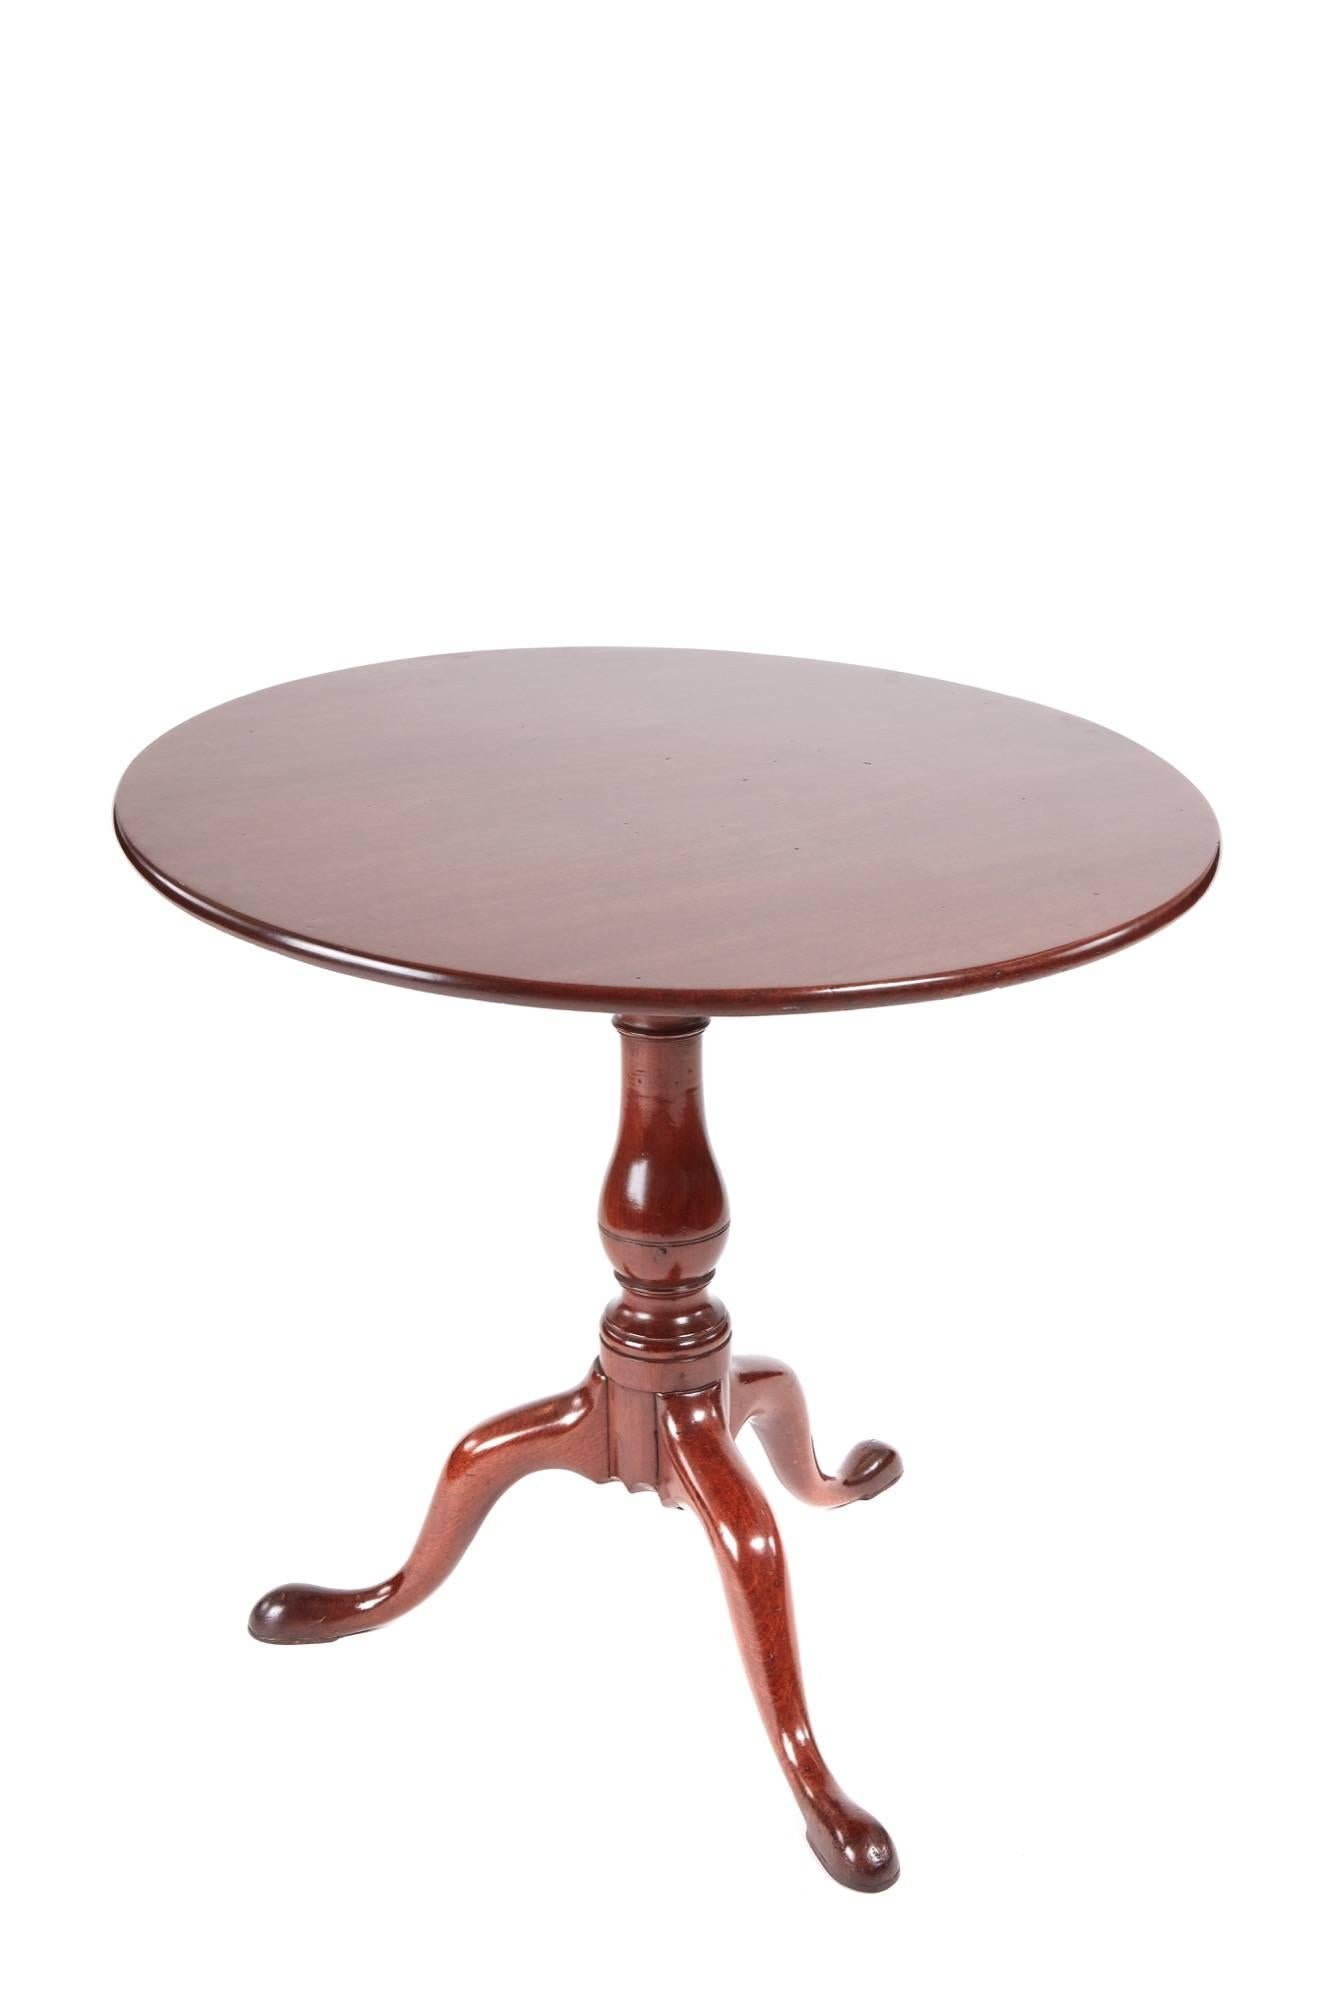 George III mahogany tripod table, with a solid mahogany round top, supported by a bird cage with four turned columns, lovely shaped turned pedestal raised on three shaped cabriole legs with pad feet
Lovely color and condition
Measures: 30